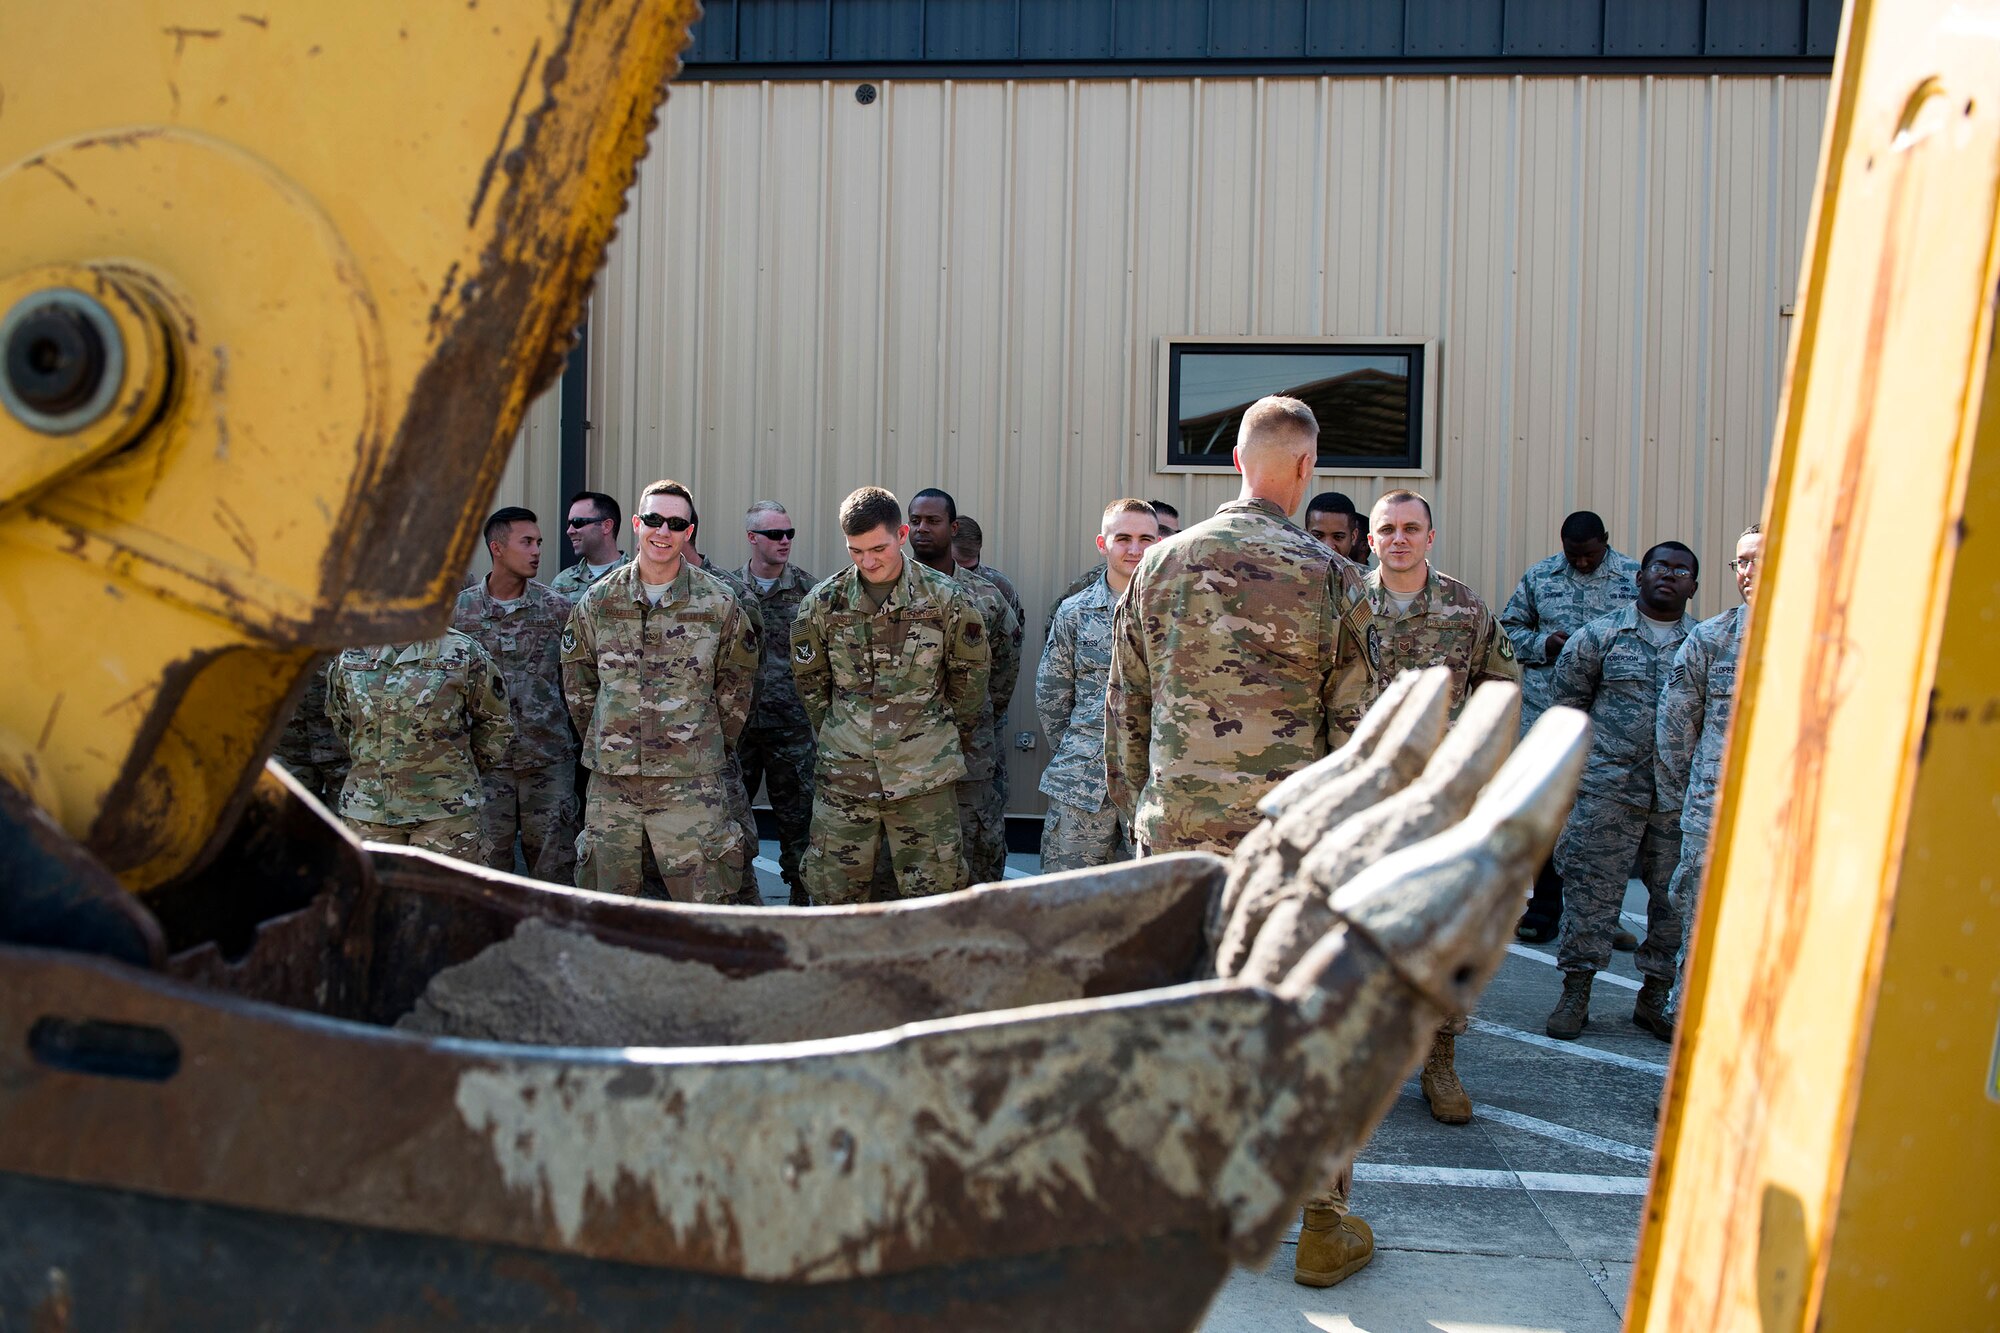 Col. Dee Jay Katzer, command engineer for Air Combat Command, speaks to Airmen from the 23d Civil Engineer Squadron (CES) during a squadron tour, May 22, 2019, at Moody Air Force Base, Ga. Katzer’s first visit to Moody consisted of a base tour, along with visiting various 23d CES shops. He also observed Airmen from the 23d CES conduct airfield recovery training. “(The visit) gives Katzer the opportunity to directly interact with the Airmen of the squadron,” said Lt. Col. Michael Francis, 23d CES commander. “This allows Katzer and his staff to better advocate for the engineering and facility requirements needed to enable the operational missions here.” (U.S. Air Force photo by Senior Airman Erick Requadt)